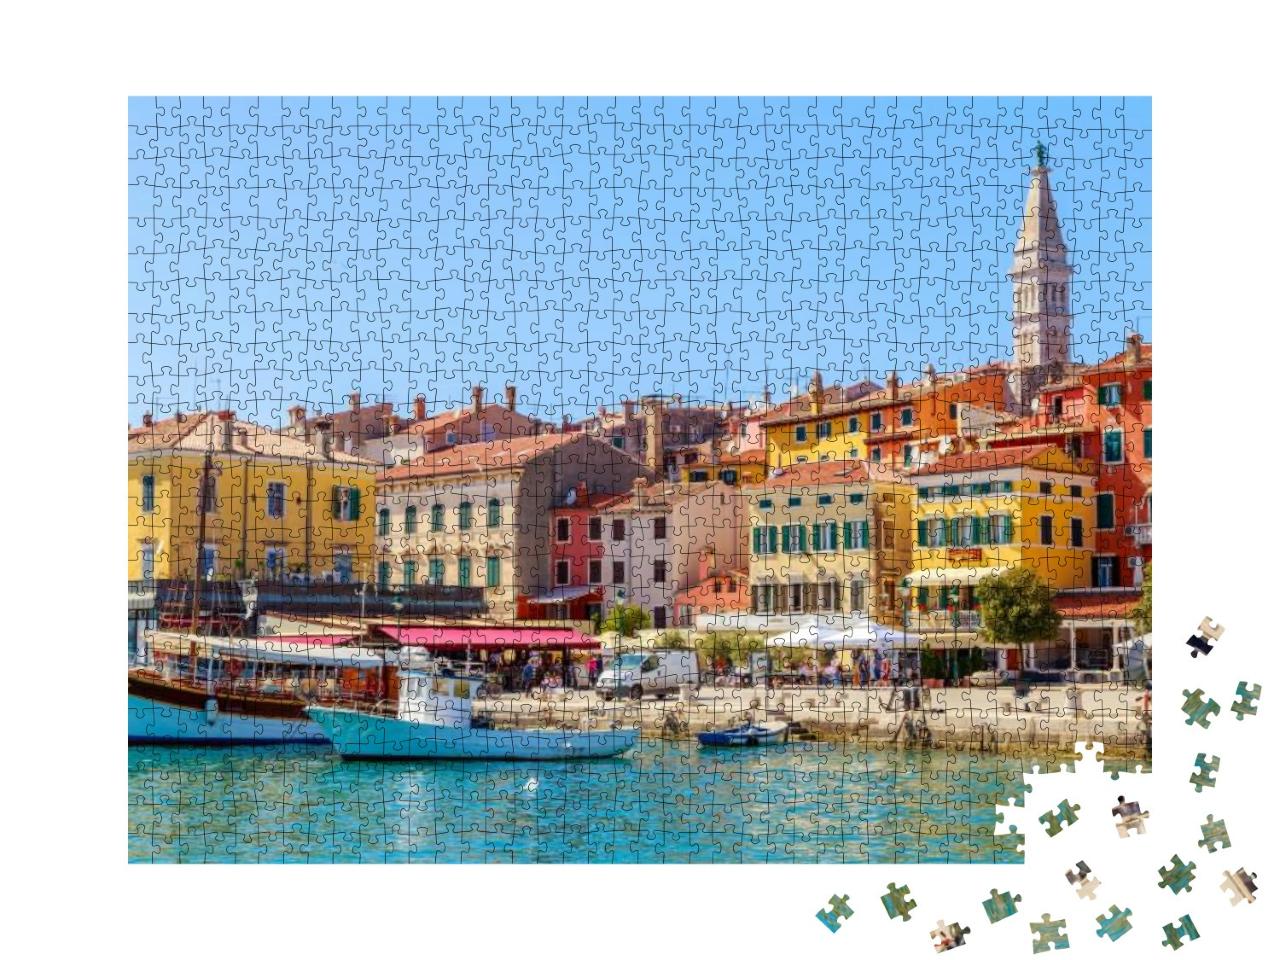 Colorful Rovinj in Istria with Boats in the Port, Croatia... Jigsaw Puzzle with 1000 pieces